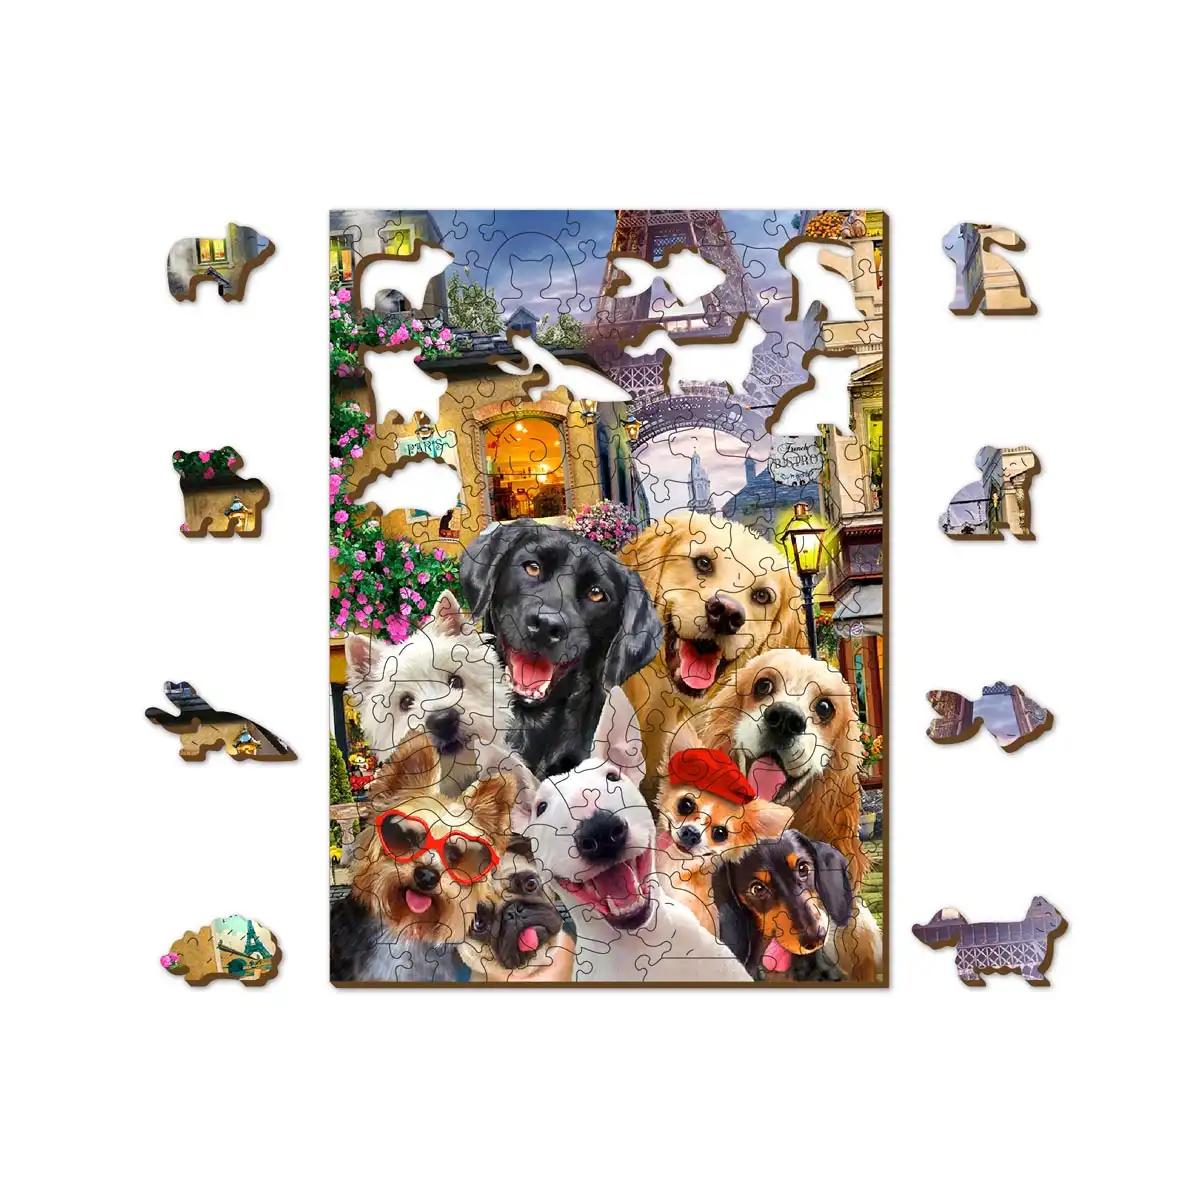 wooden dog puzzle, I love dog puzzle, wooden puzzle dogs, games and puzzles,  wooden animal shaped puzzles, wooden puzzle dogs, dog puzzles